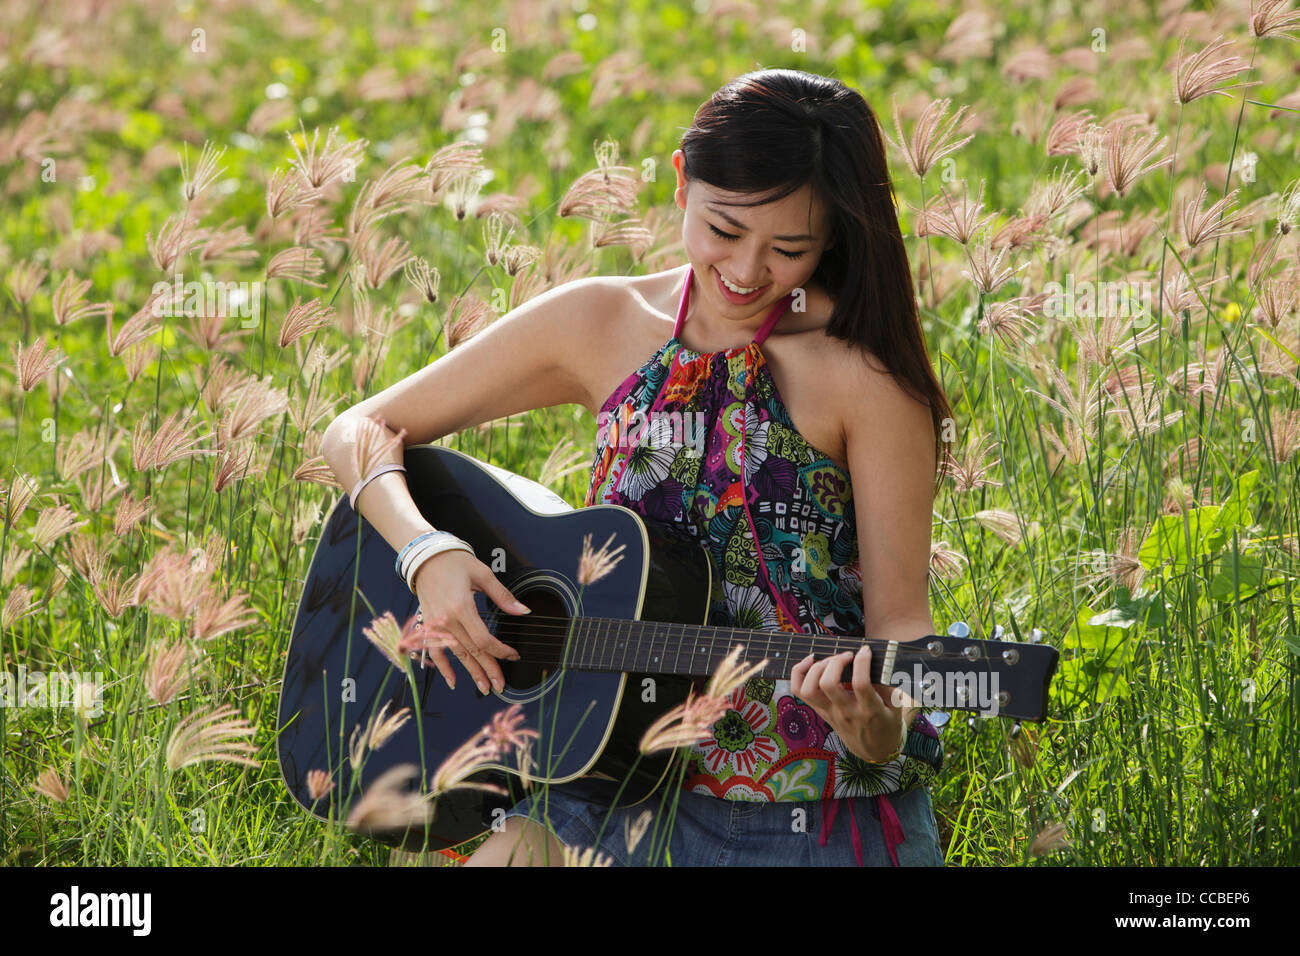 Woman playing guitar outside in grassy field. Stock Photo